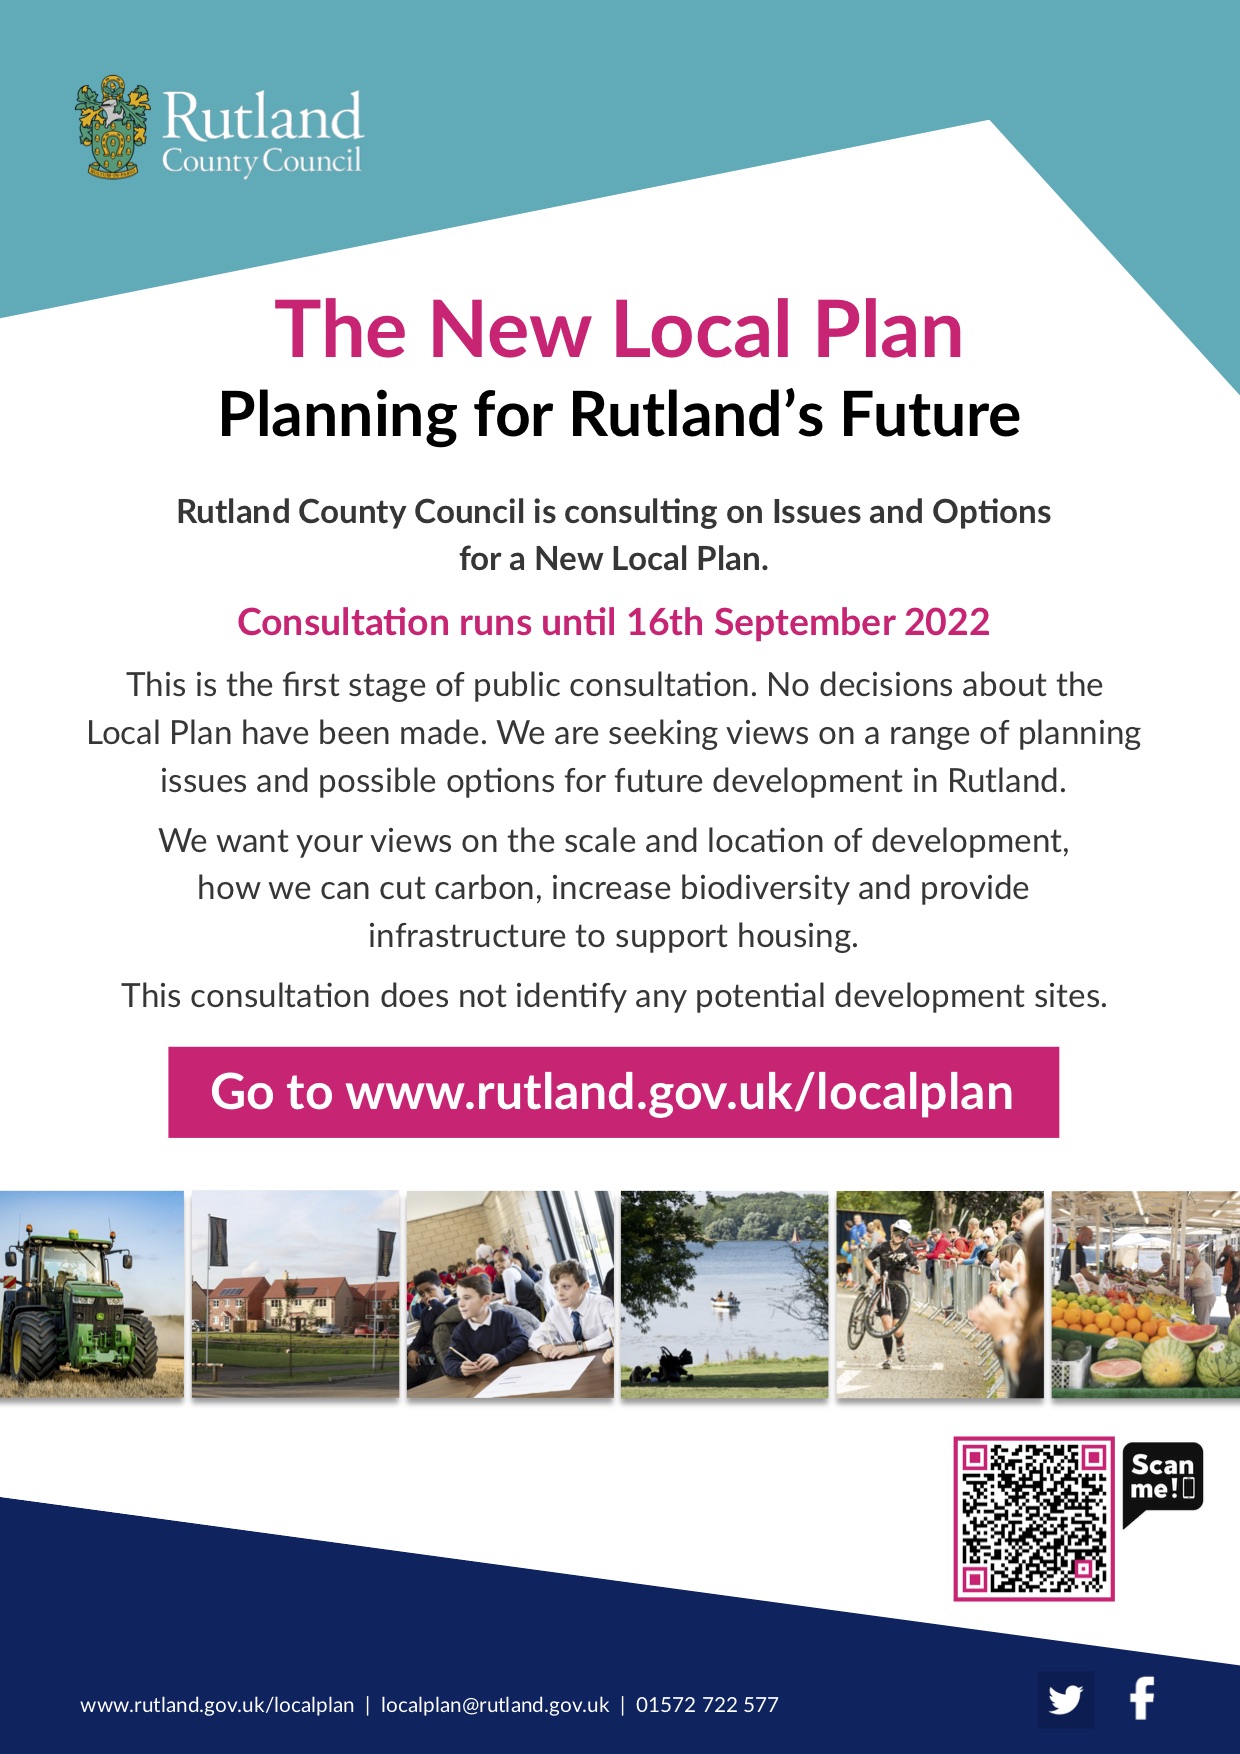 Rutland County Council is consulting on Issues and Options for a New Local Plan.